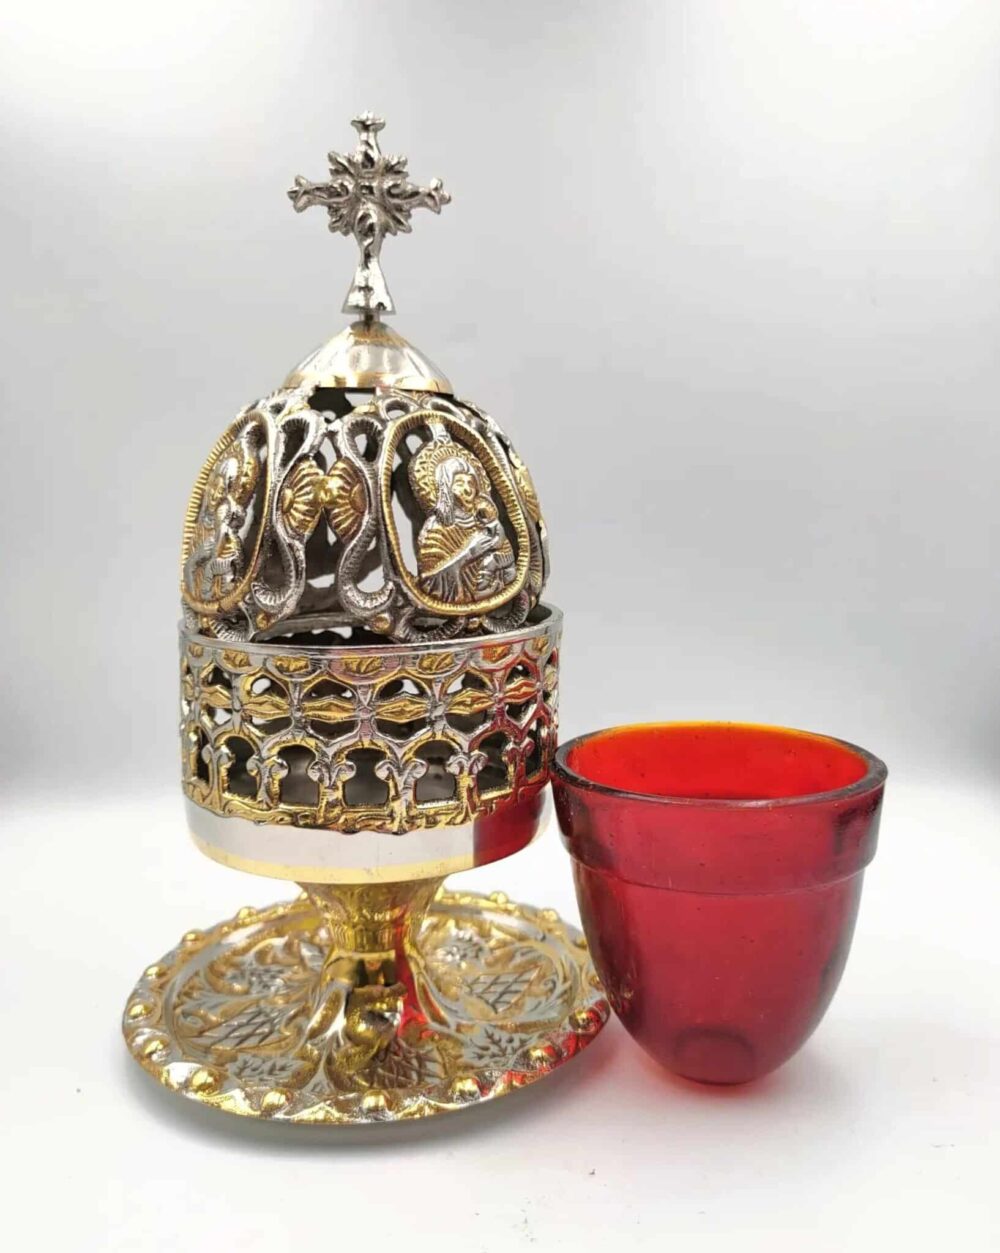 Two-color candlestick with saucer